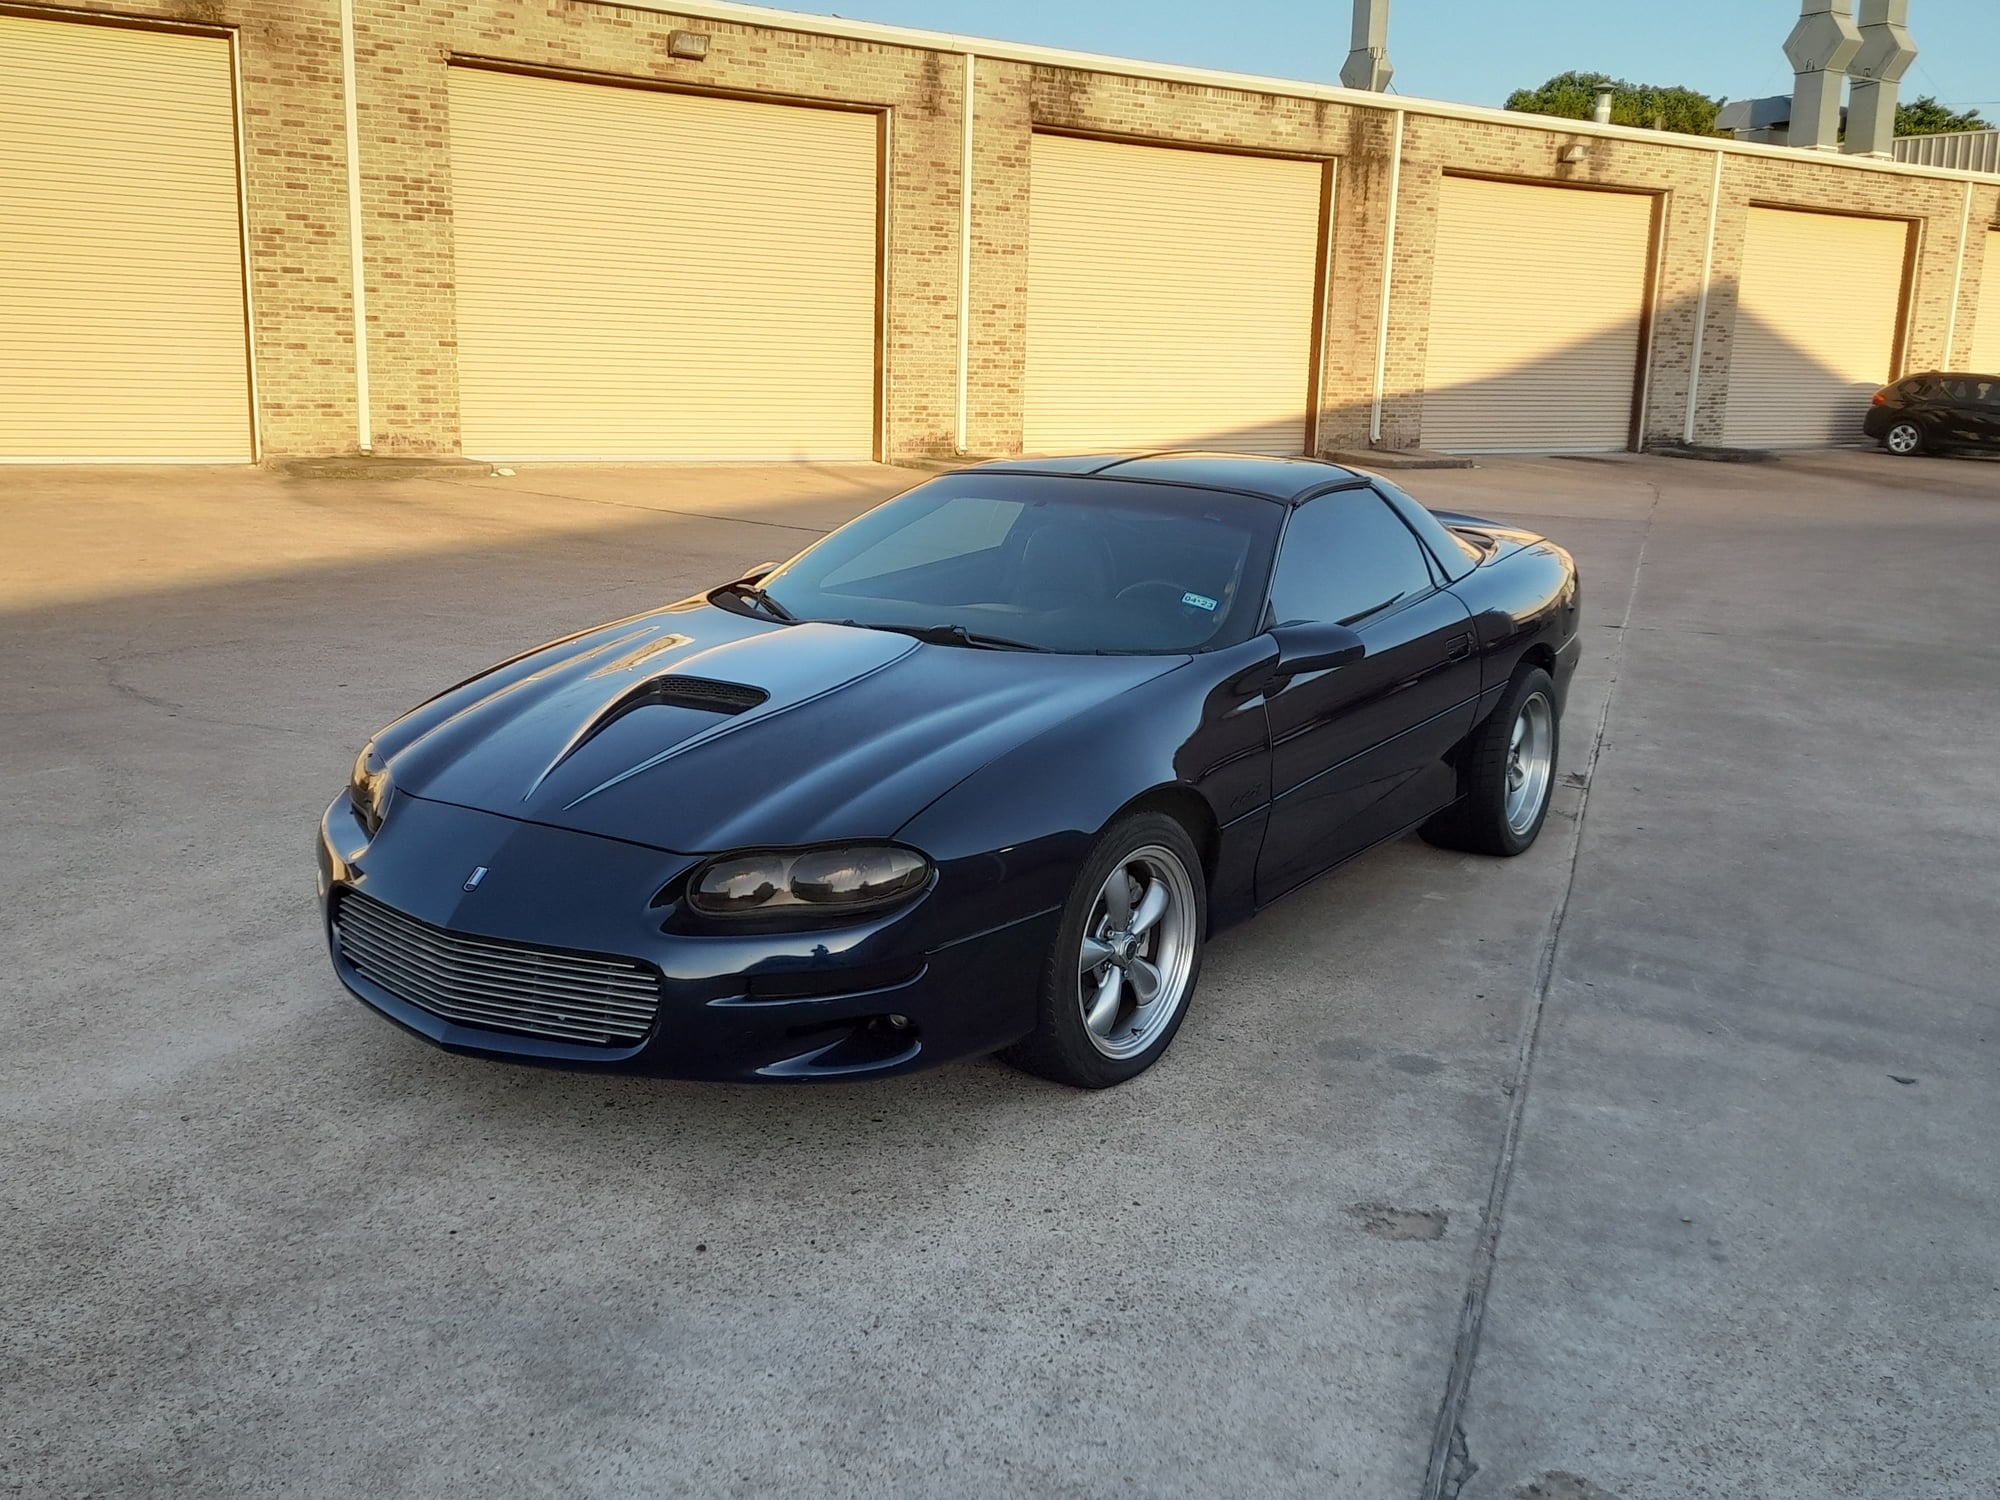 2002 Chevrolet Camaro - 2002 Chevrolet Camaro Z28 35th anniversary 6-Speed manual - Used - VIN 2G1FP22G322152585 - 89,000 Miles - 8 cyl - 2WD - Manual - Coupe - Blue - Houston, TX 77479, United States